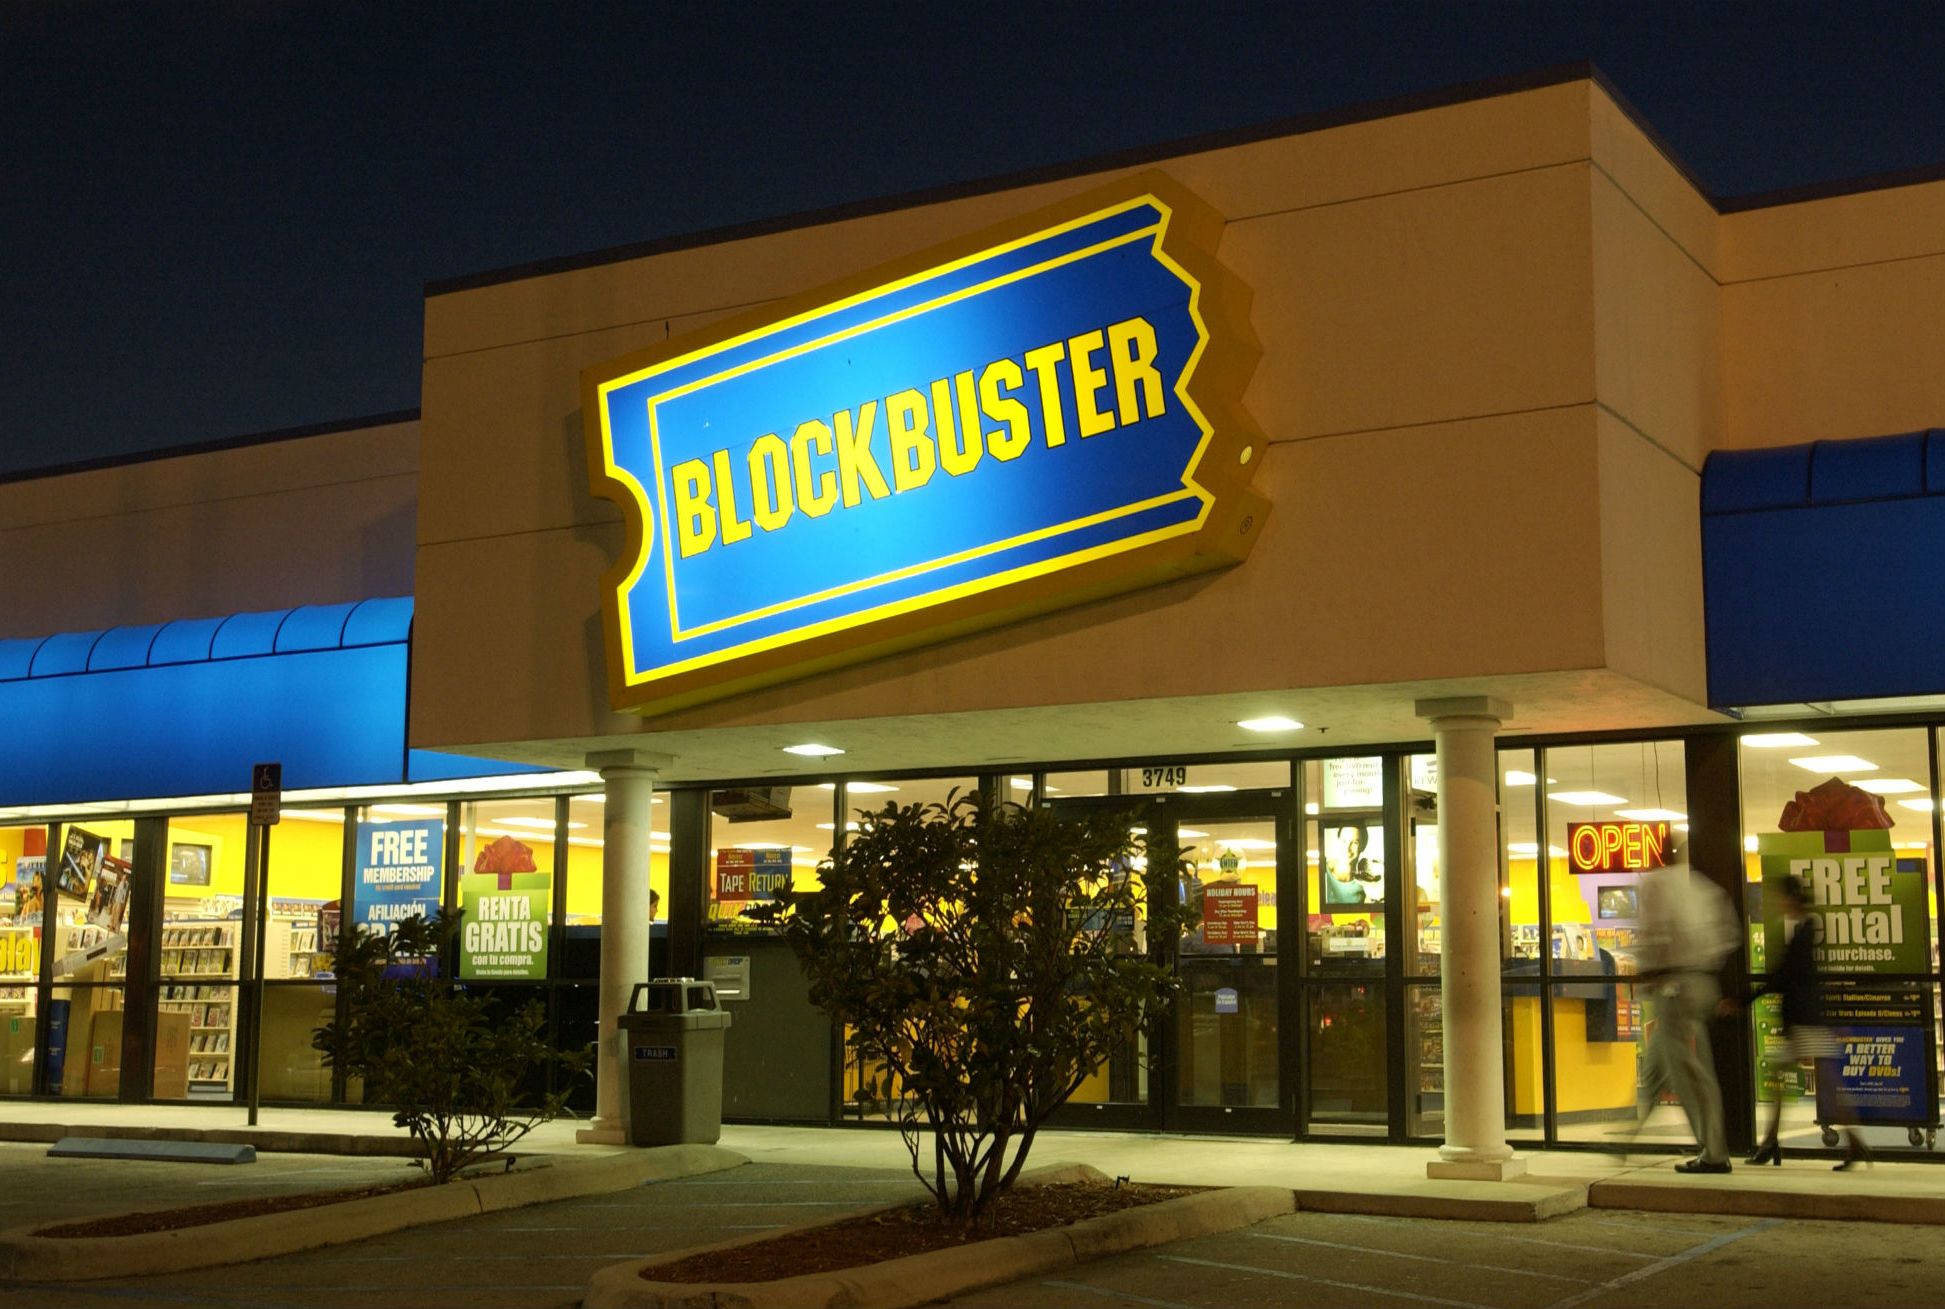 Blockbuster Lease Negotiations and Fridays Sale Leaseback